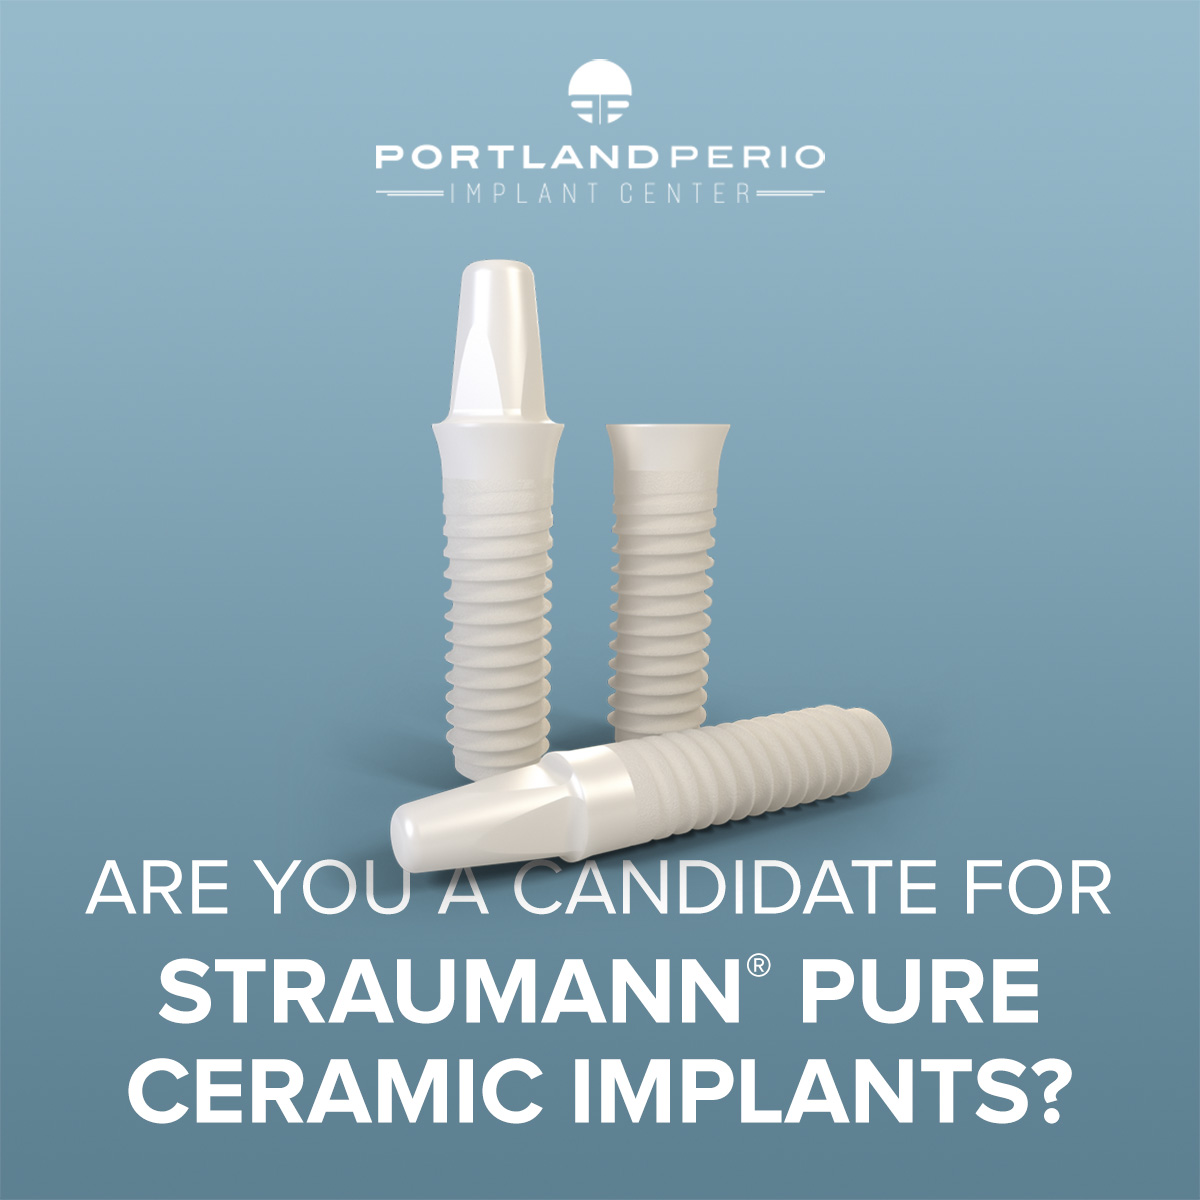 Are You A Candidate for Straumann Ceramic Implants? - Dr. Kamran Haghighat of Portland Perio Implant Center